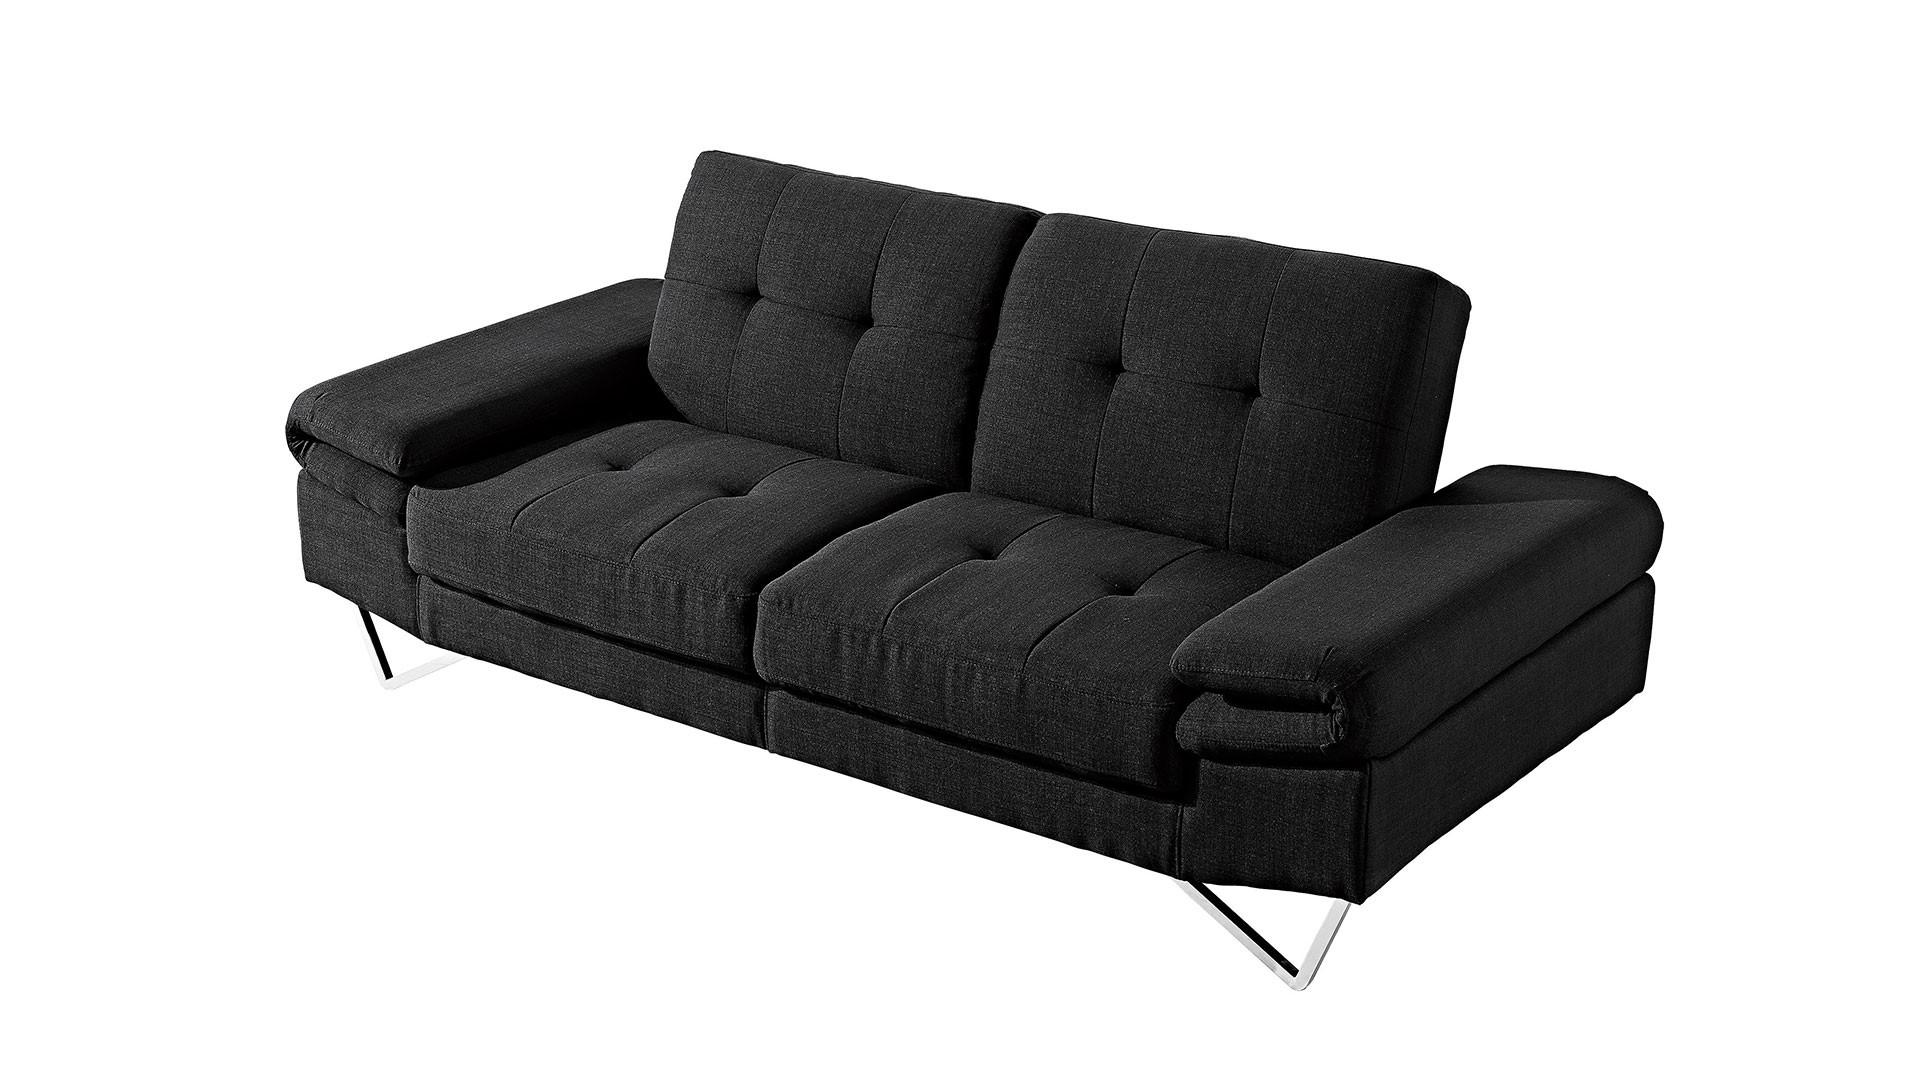 At Home USA Lucia Sofa bed